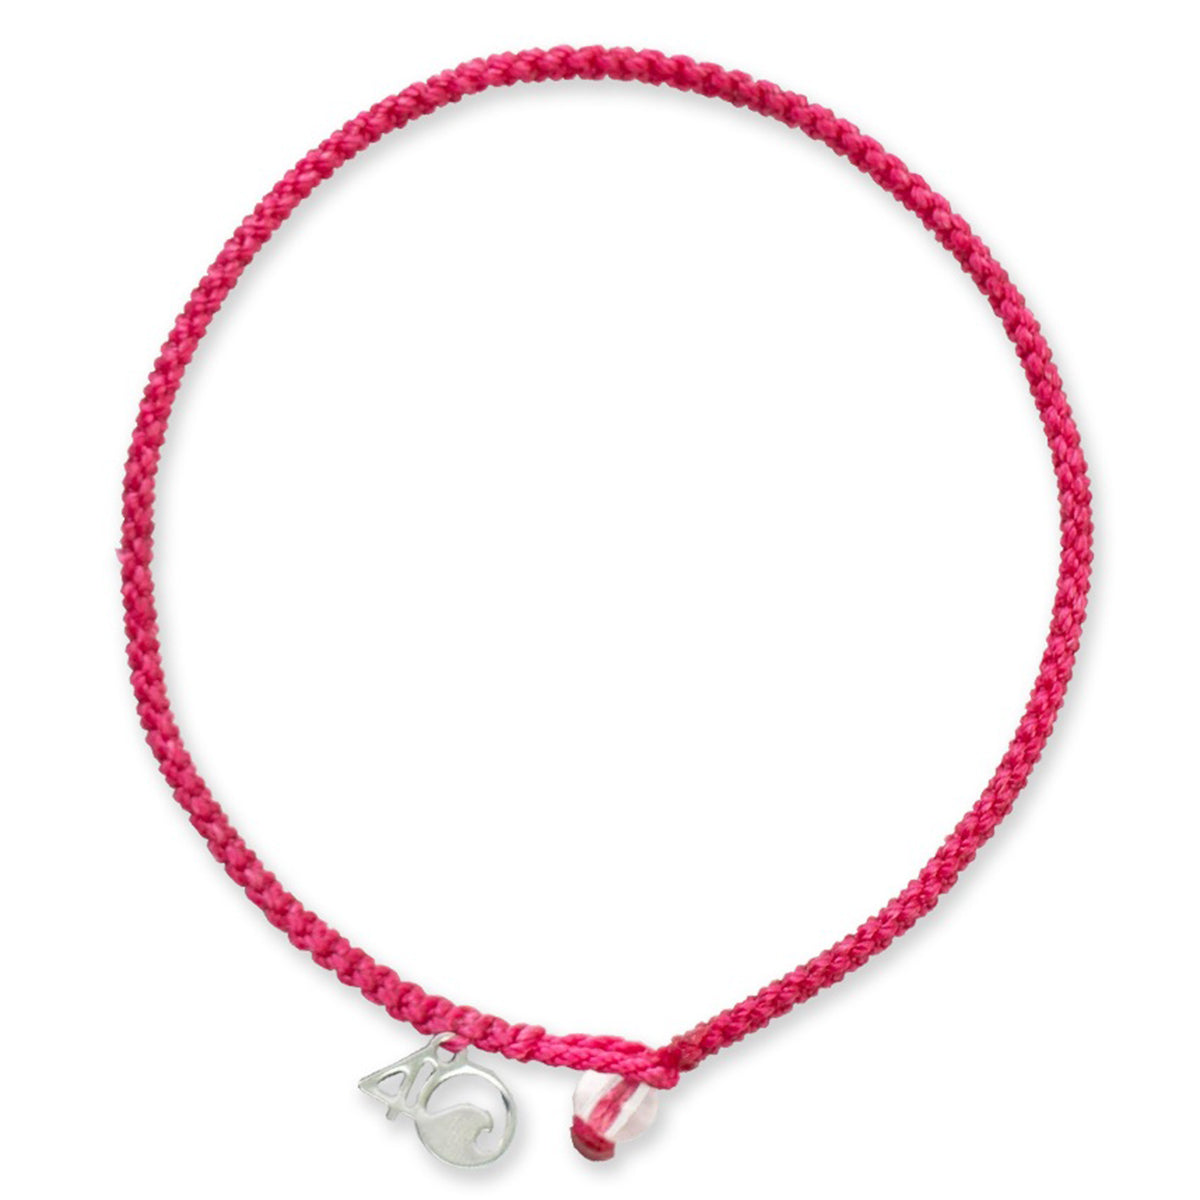 Pink 4Ocean Flamingo Small Braided Bracelet with a silver charm on a white background, featuring a waterproof design.